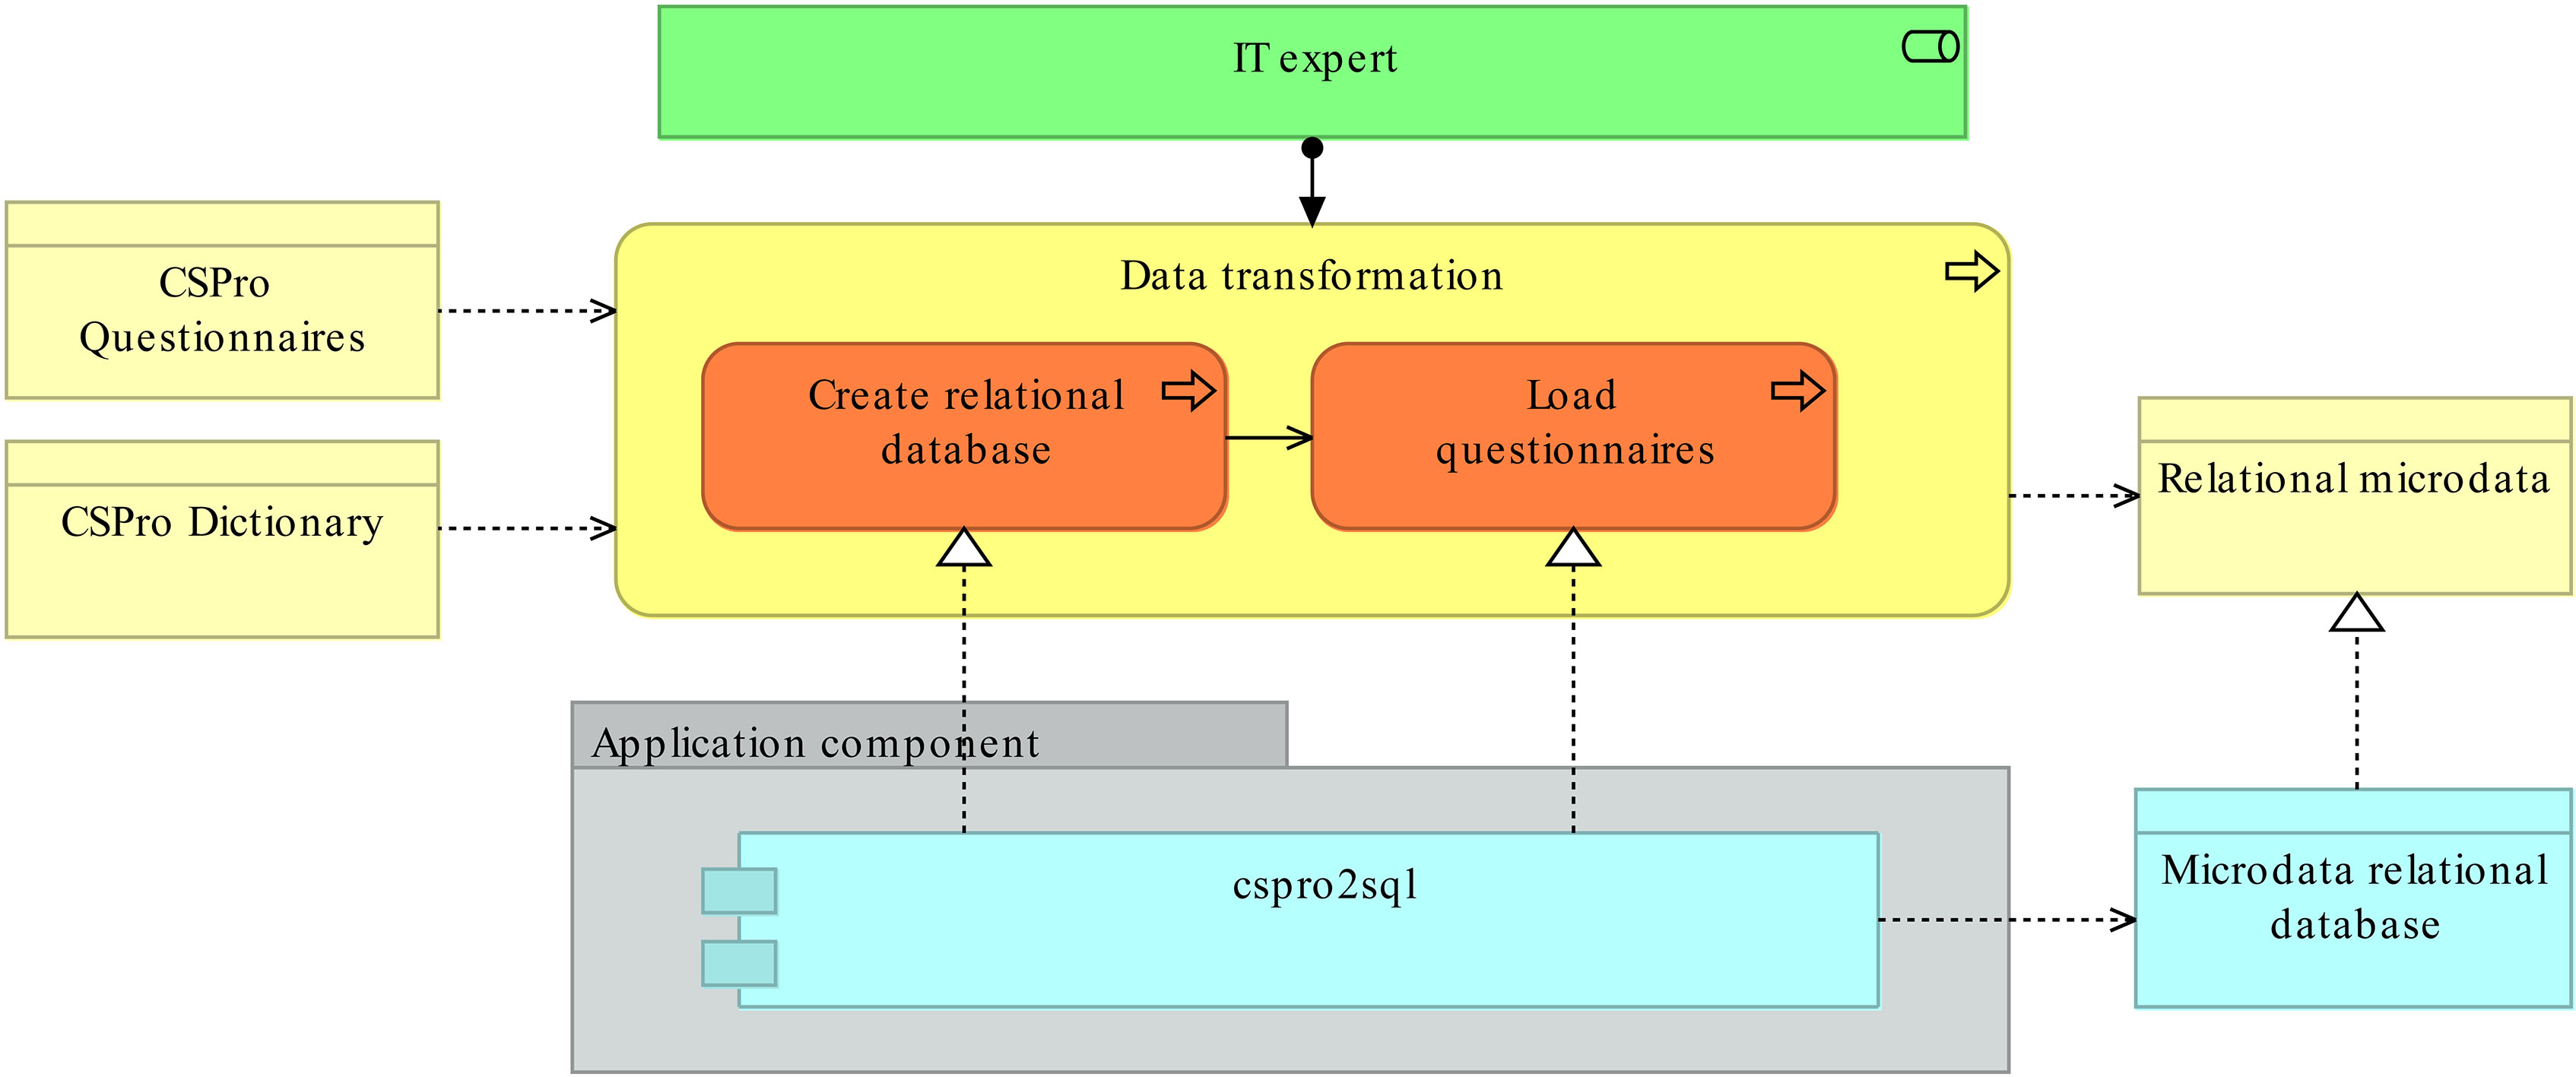 Data transformation process: the upper part of the image corresponds to the ‘business view’ of the ‘Data transformation’ process, including inputs/outputs and roles involved. The lower part shows the ‘application component’ that implement the ‘Create relational database’ and ‘Load questionnaires’ business process (cspro2sql).